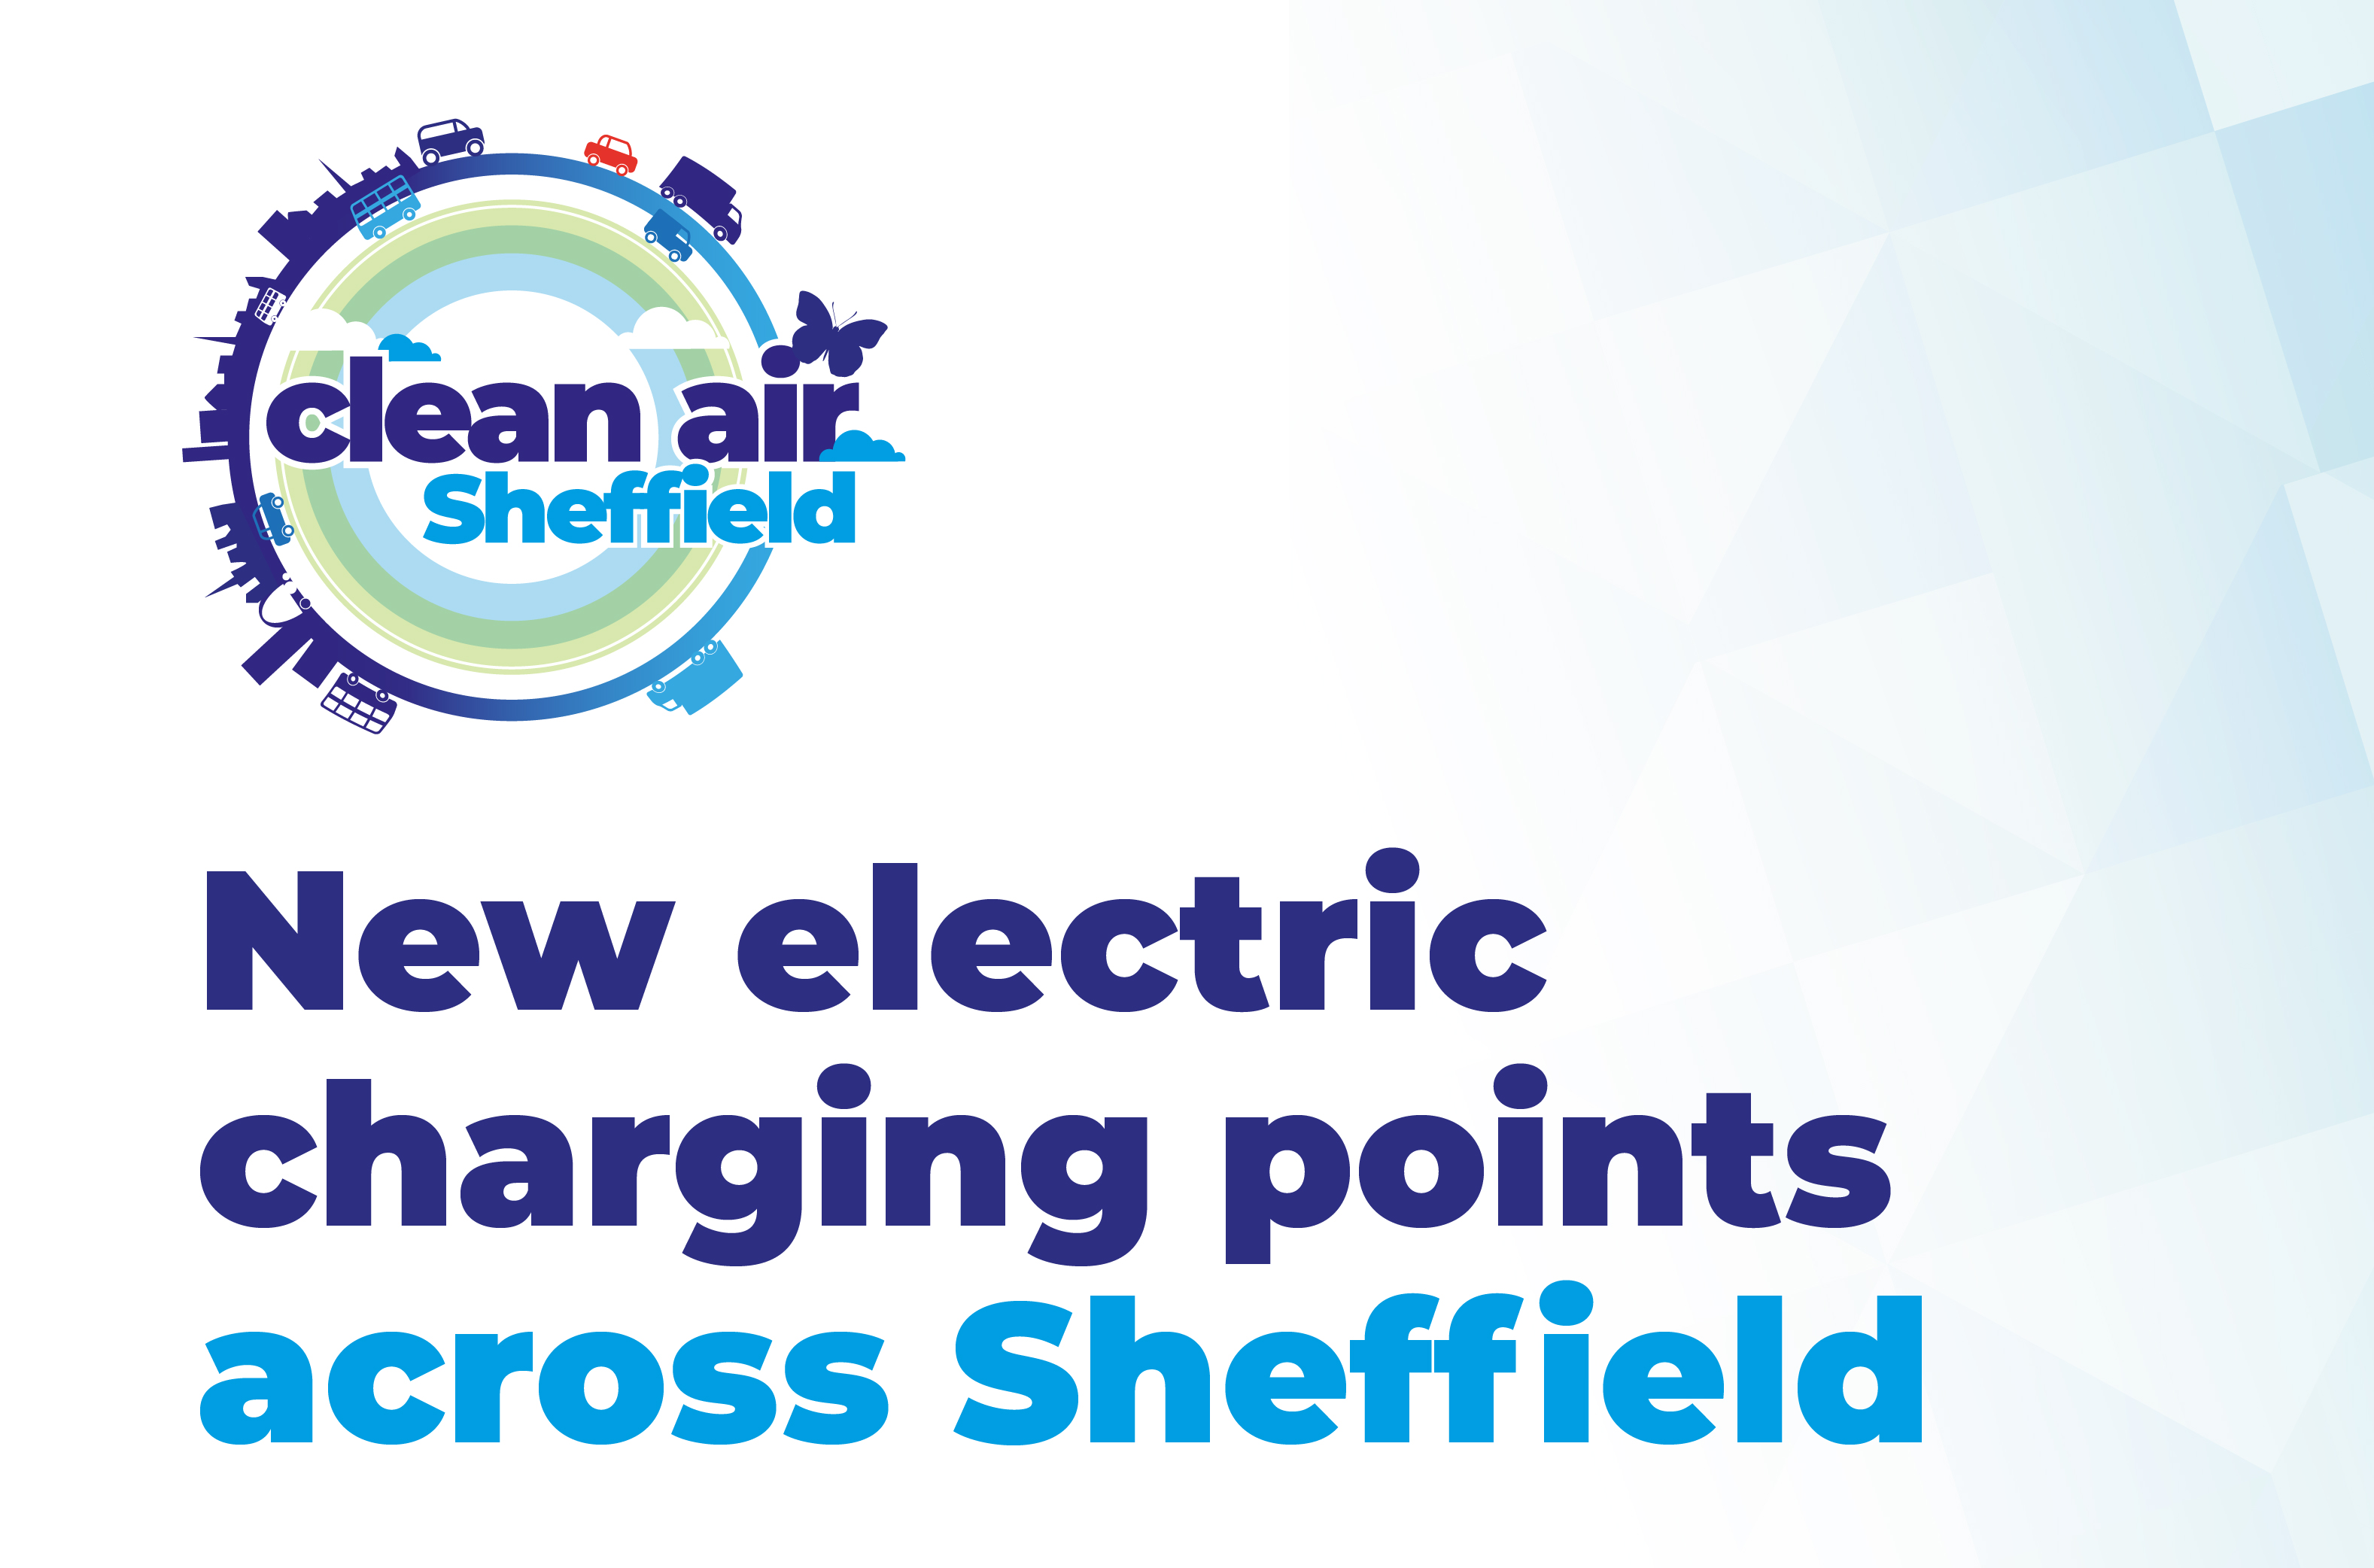 New electric charging points across Sheffield